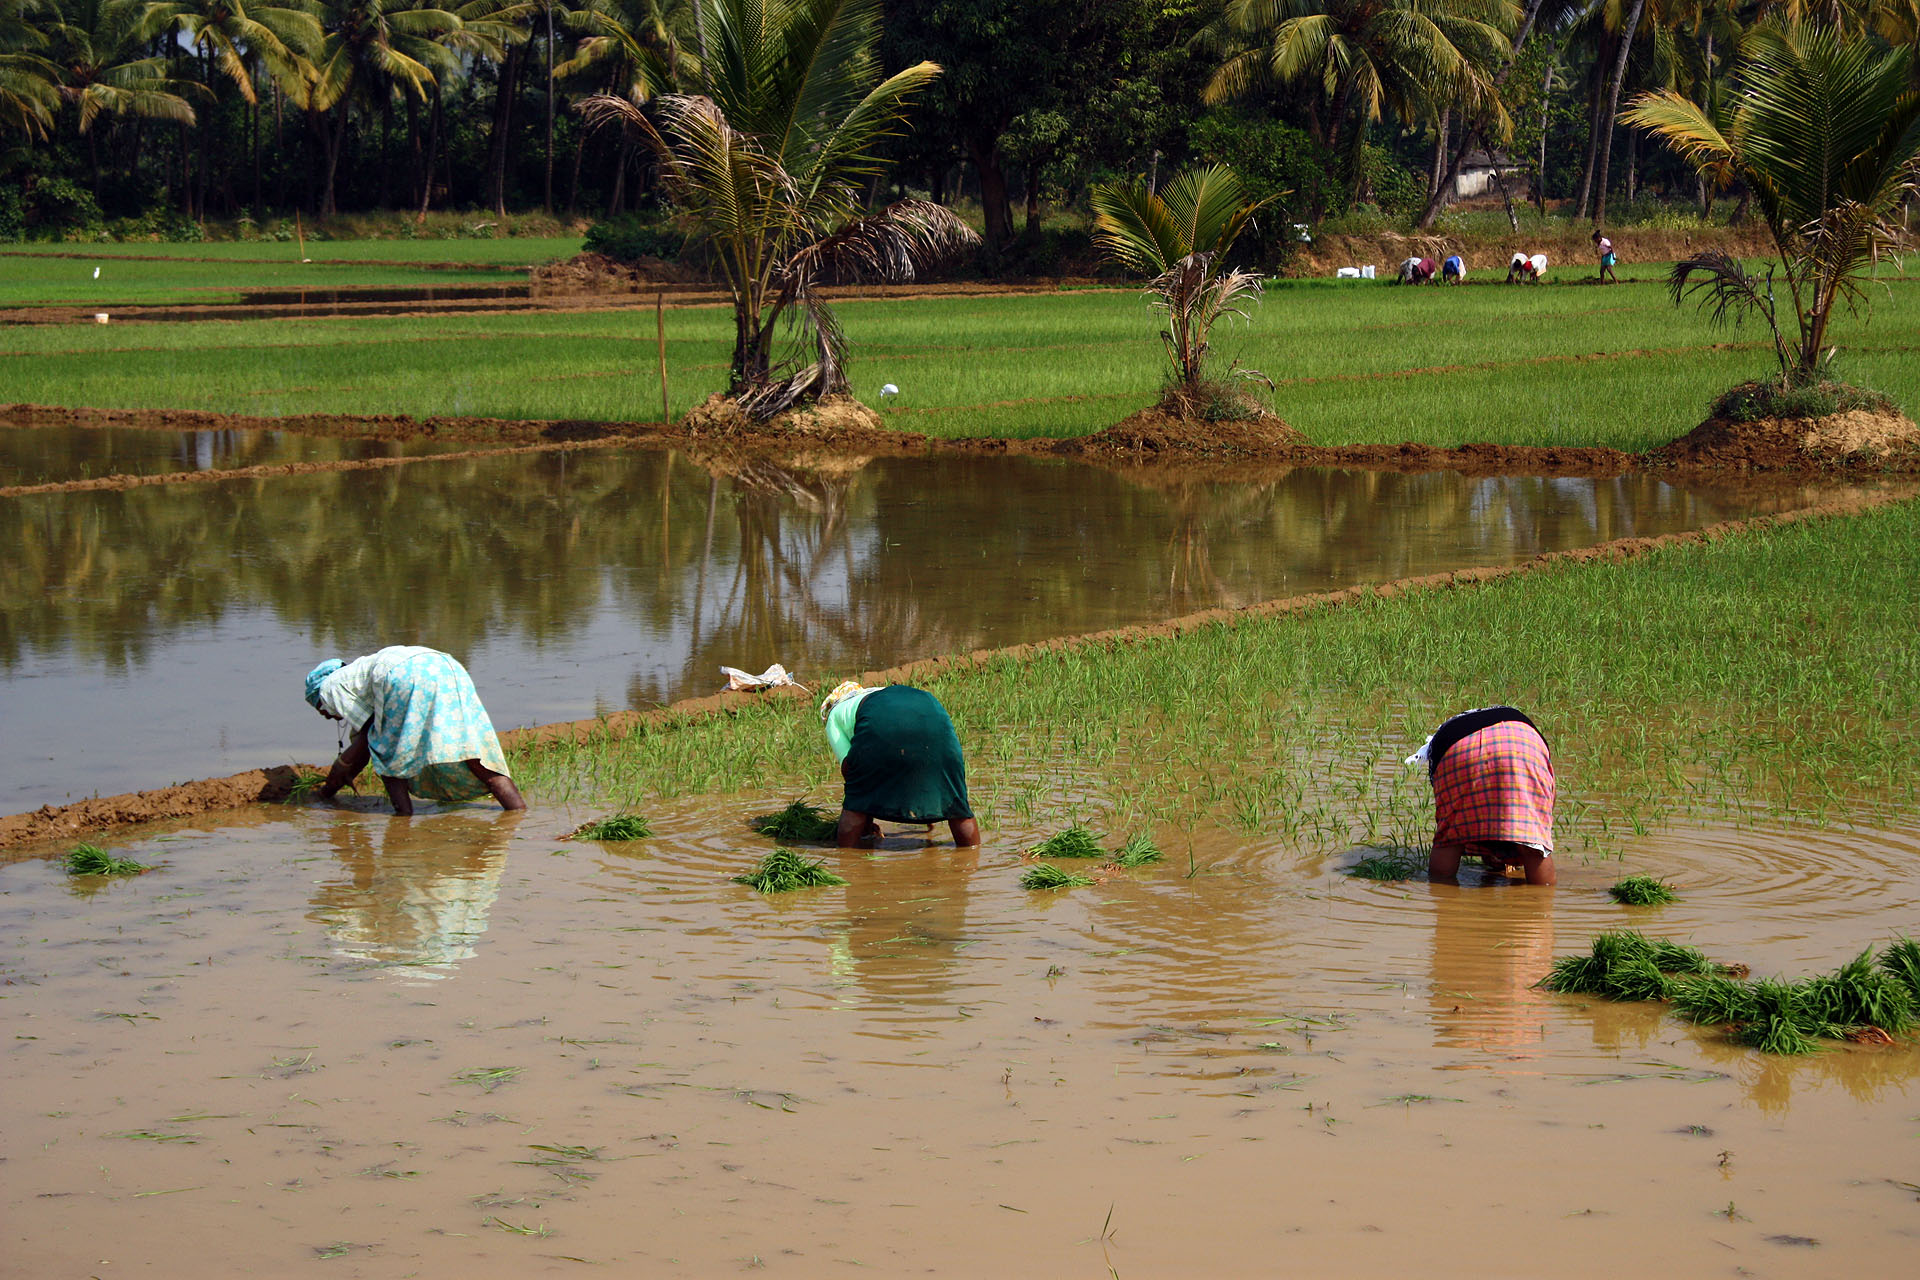 Workers in the paddy fields